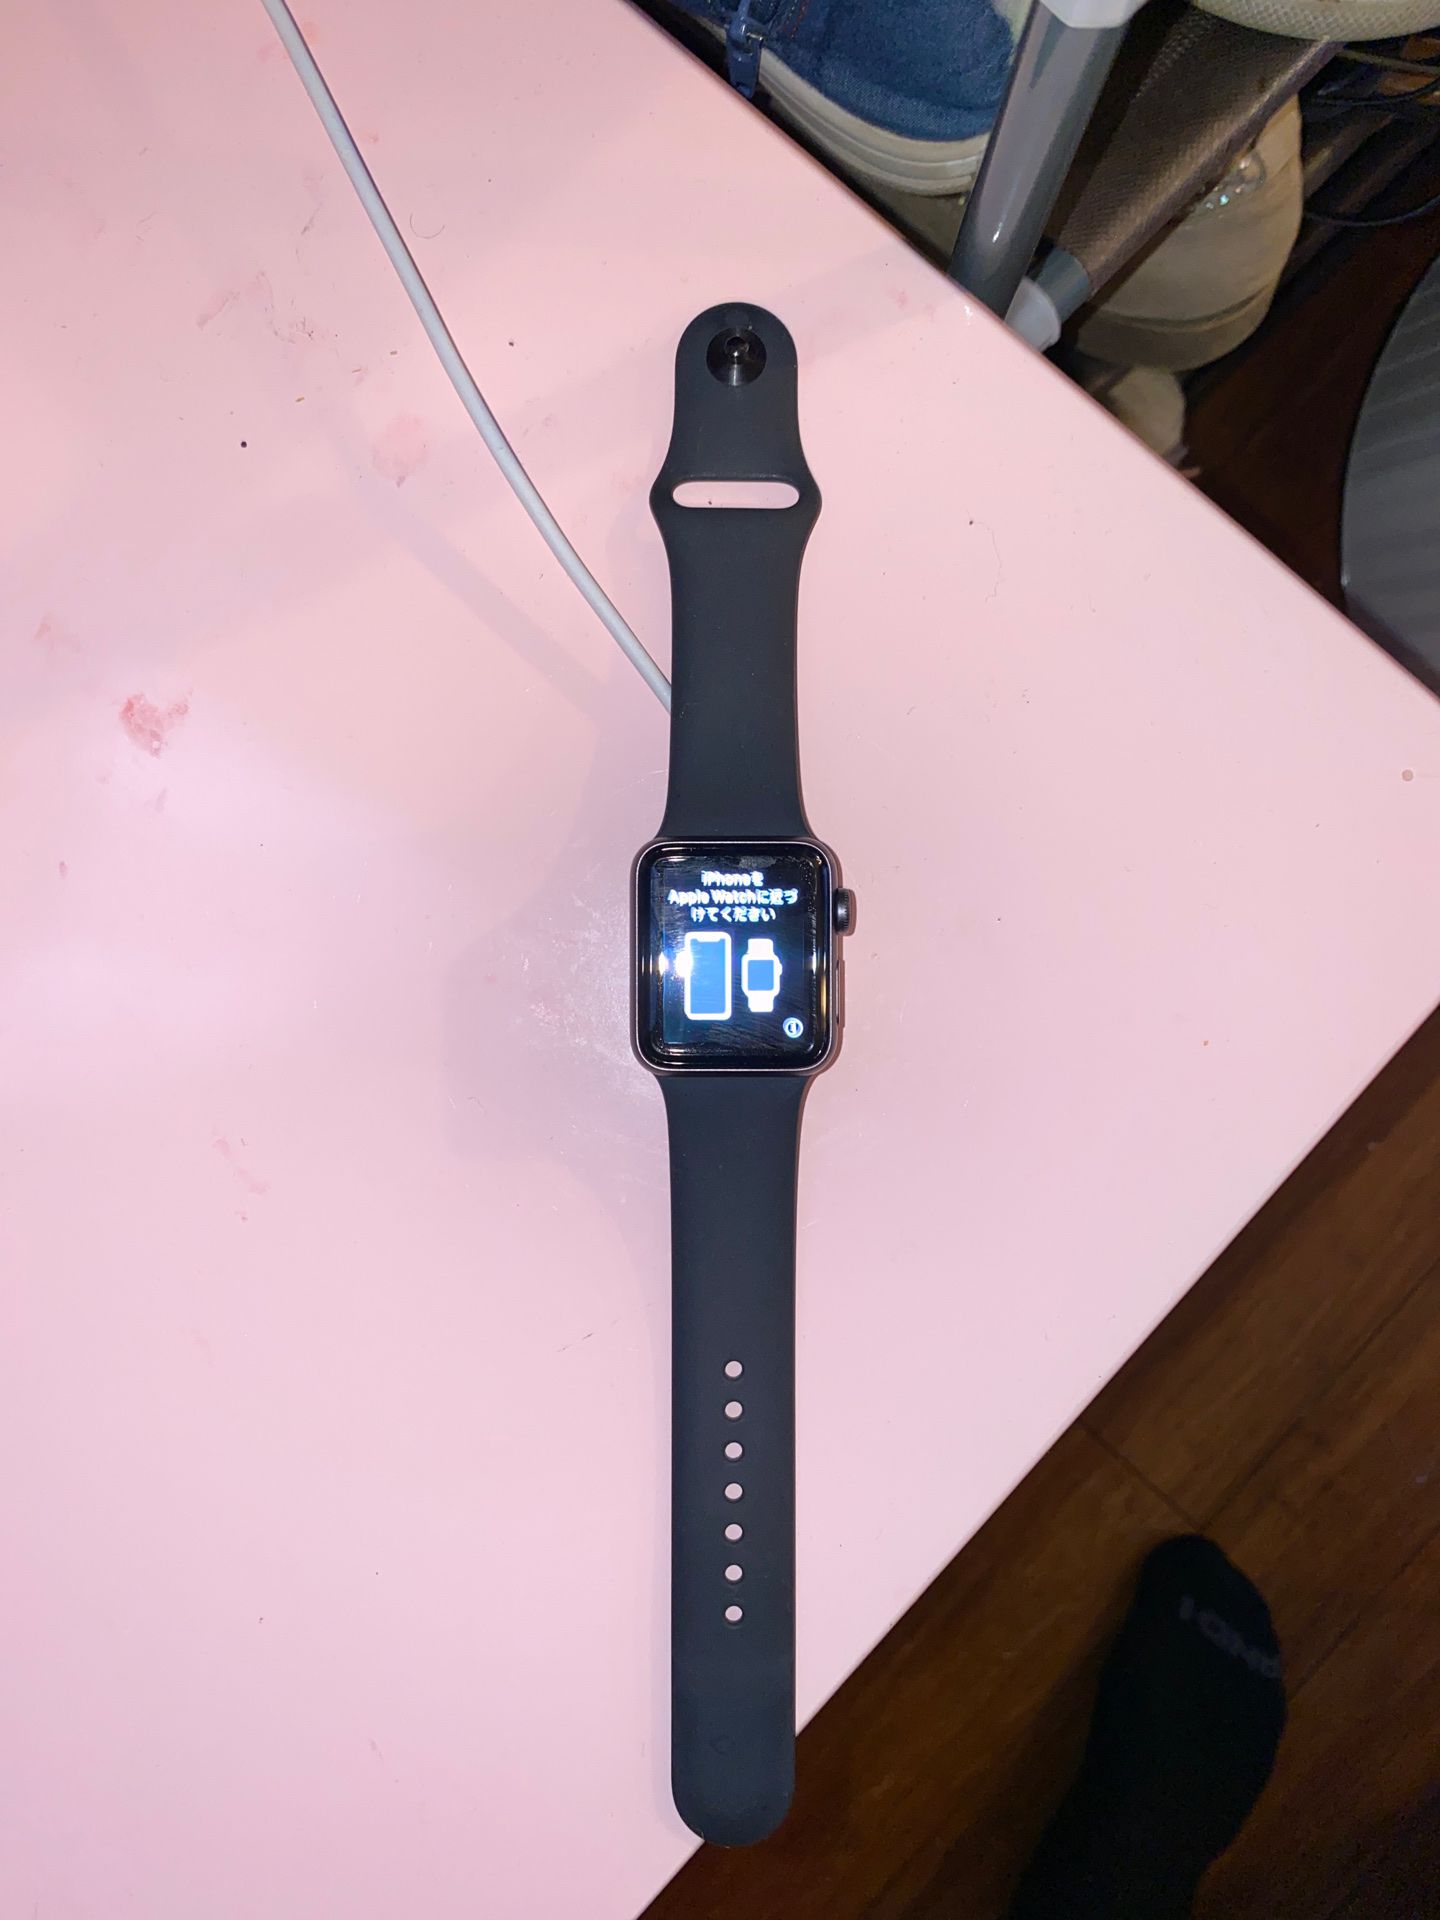 Series 3, mint no scratches (hard to tell from pics)